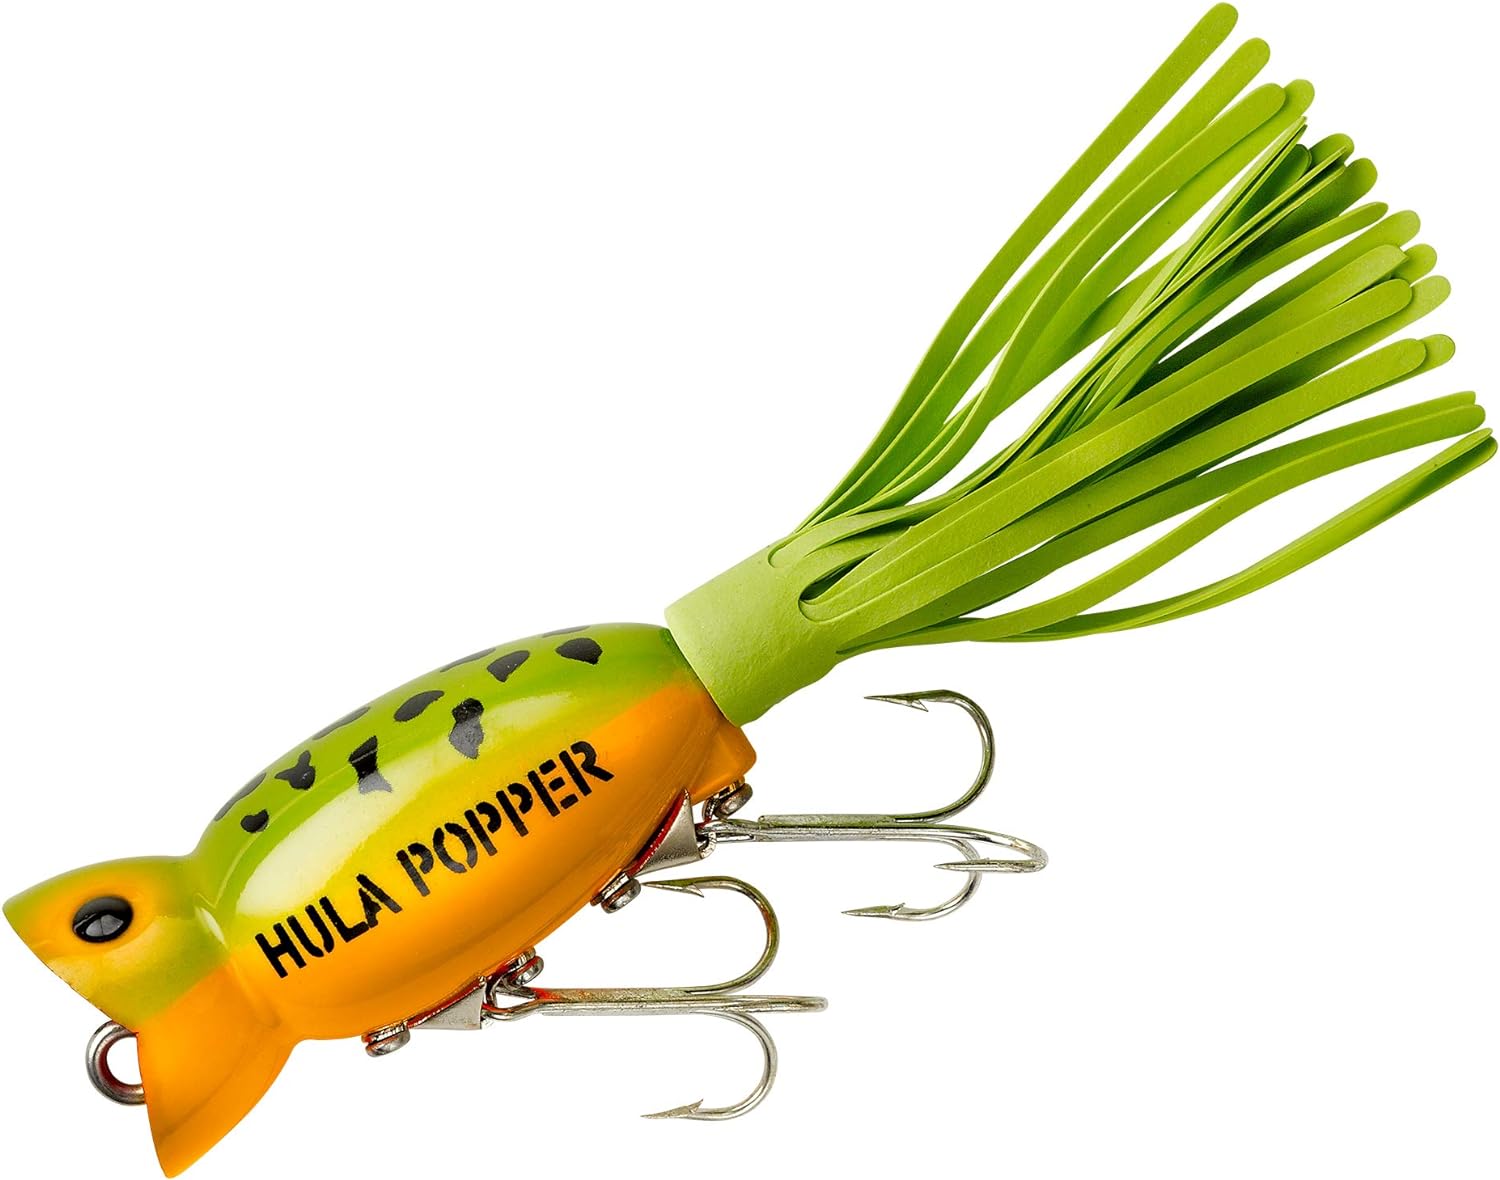 An image of a colorful topwater popper, perfect for attracting bass from the shore.